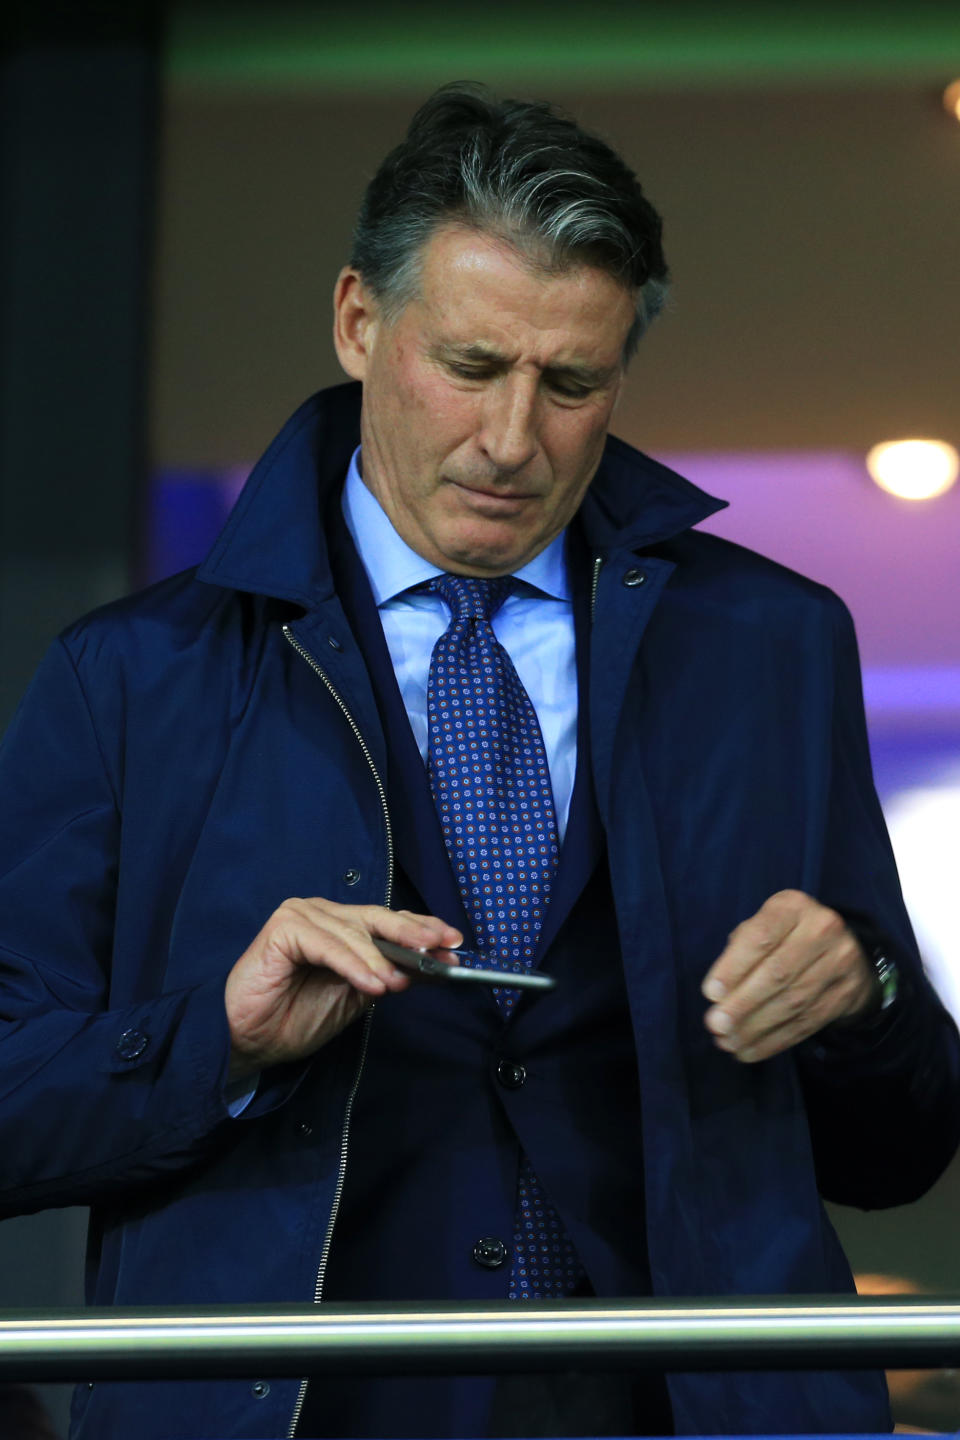  Lord Sebastian Coe, pictured here during a Chelsea game.